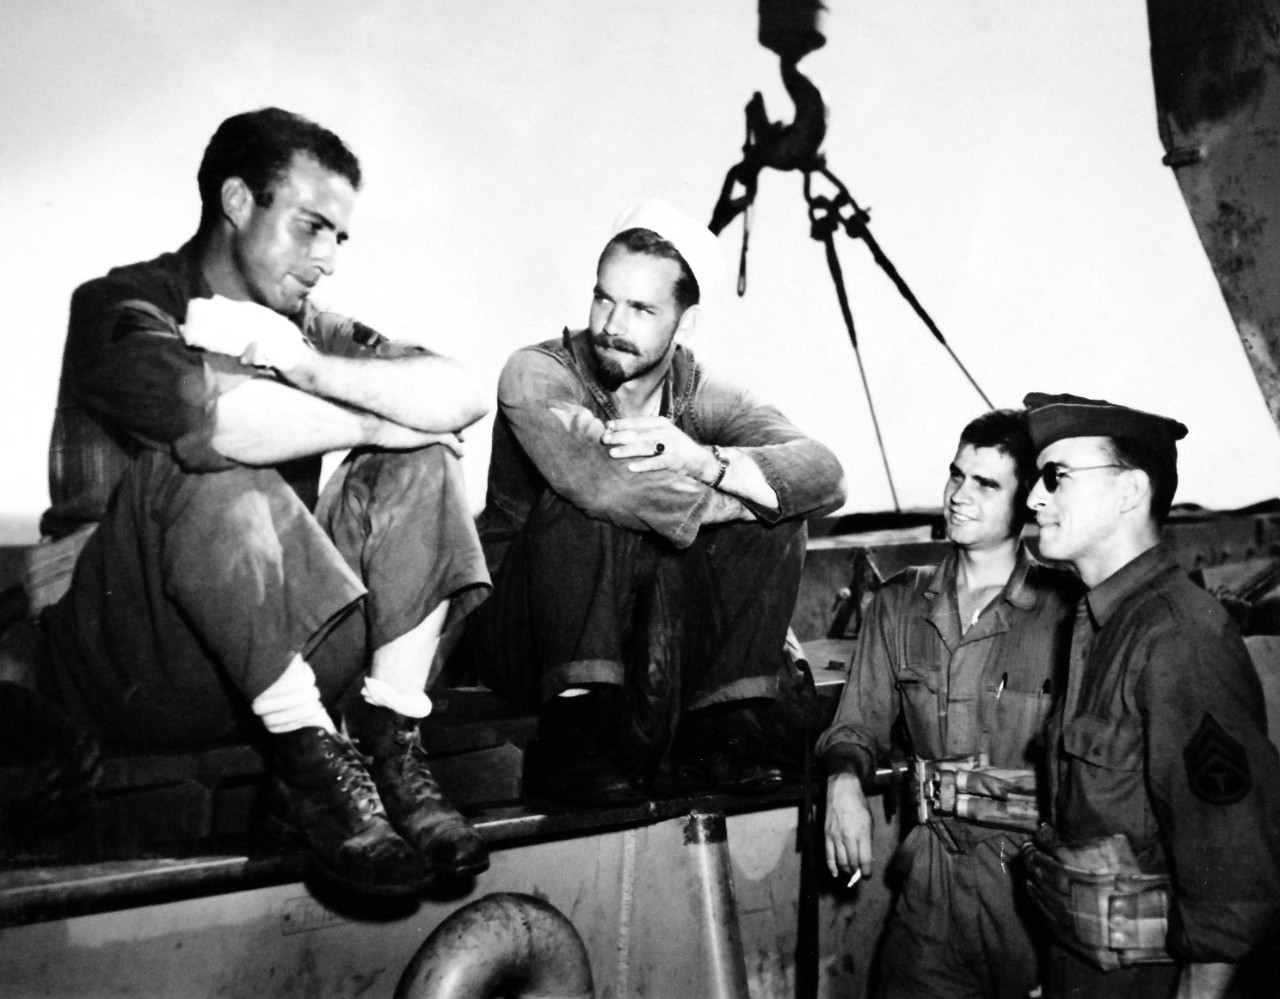 26-G-1989:  Operation Avalanche,  September 1943.   Comparing Close Calls.  Comparing close calls with death was a favorite conversational subject among soldiers and Coast Guardsmen onboard a Coast Guard manned transport returning from Salerno.  Shown from left to right:  Sergeant Curtis F. Ellison; Coast Guardsman C.B. Lewis; Private First Class Harold Norman; and Sergeant Edmond Gosselin.   Official U.S. Coast Guard Photograph, now in the collections of the National Archives.   (2015/5/19). 